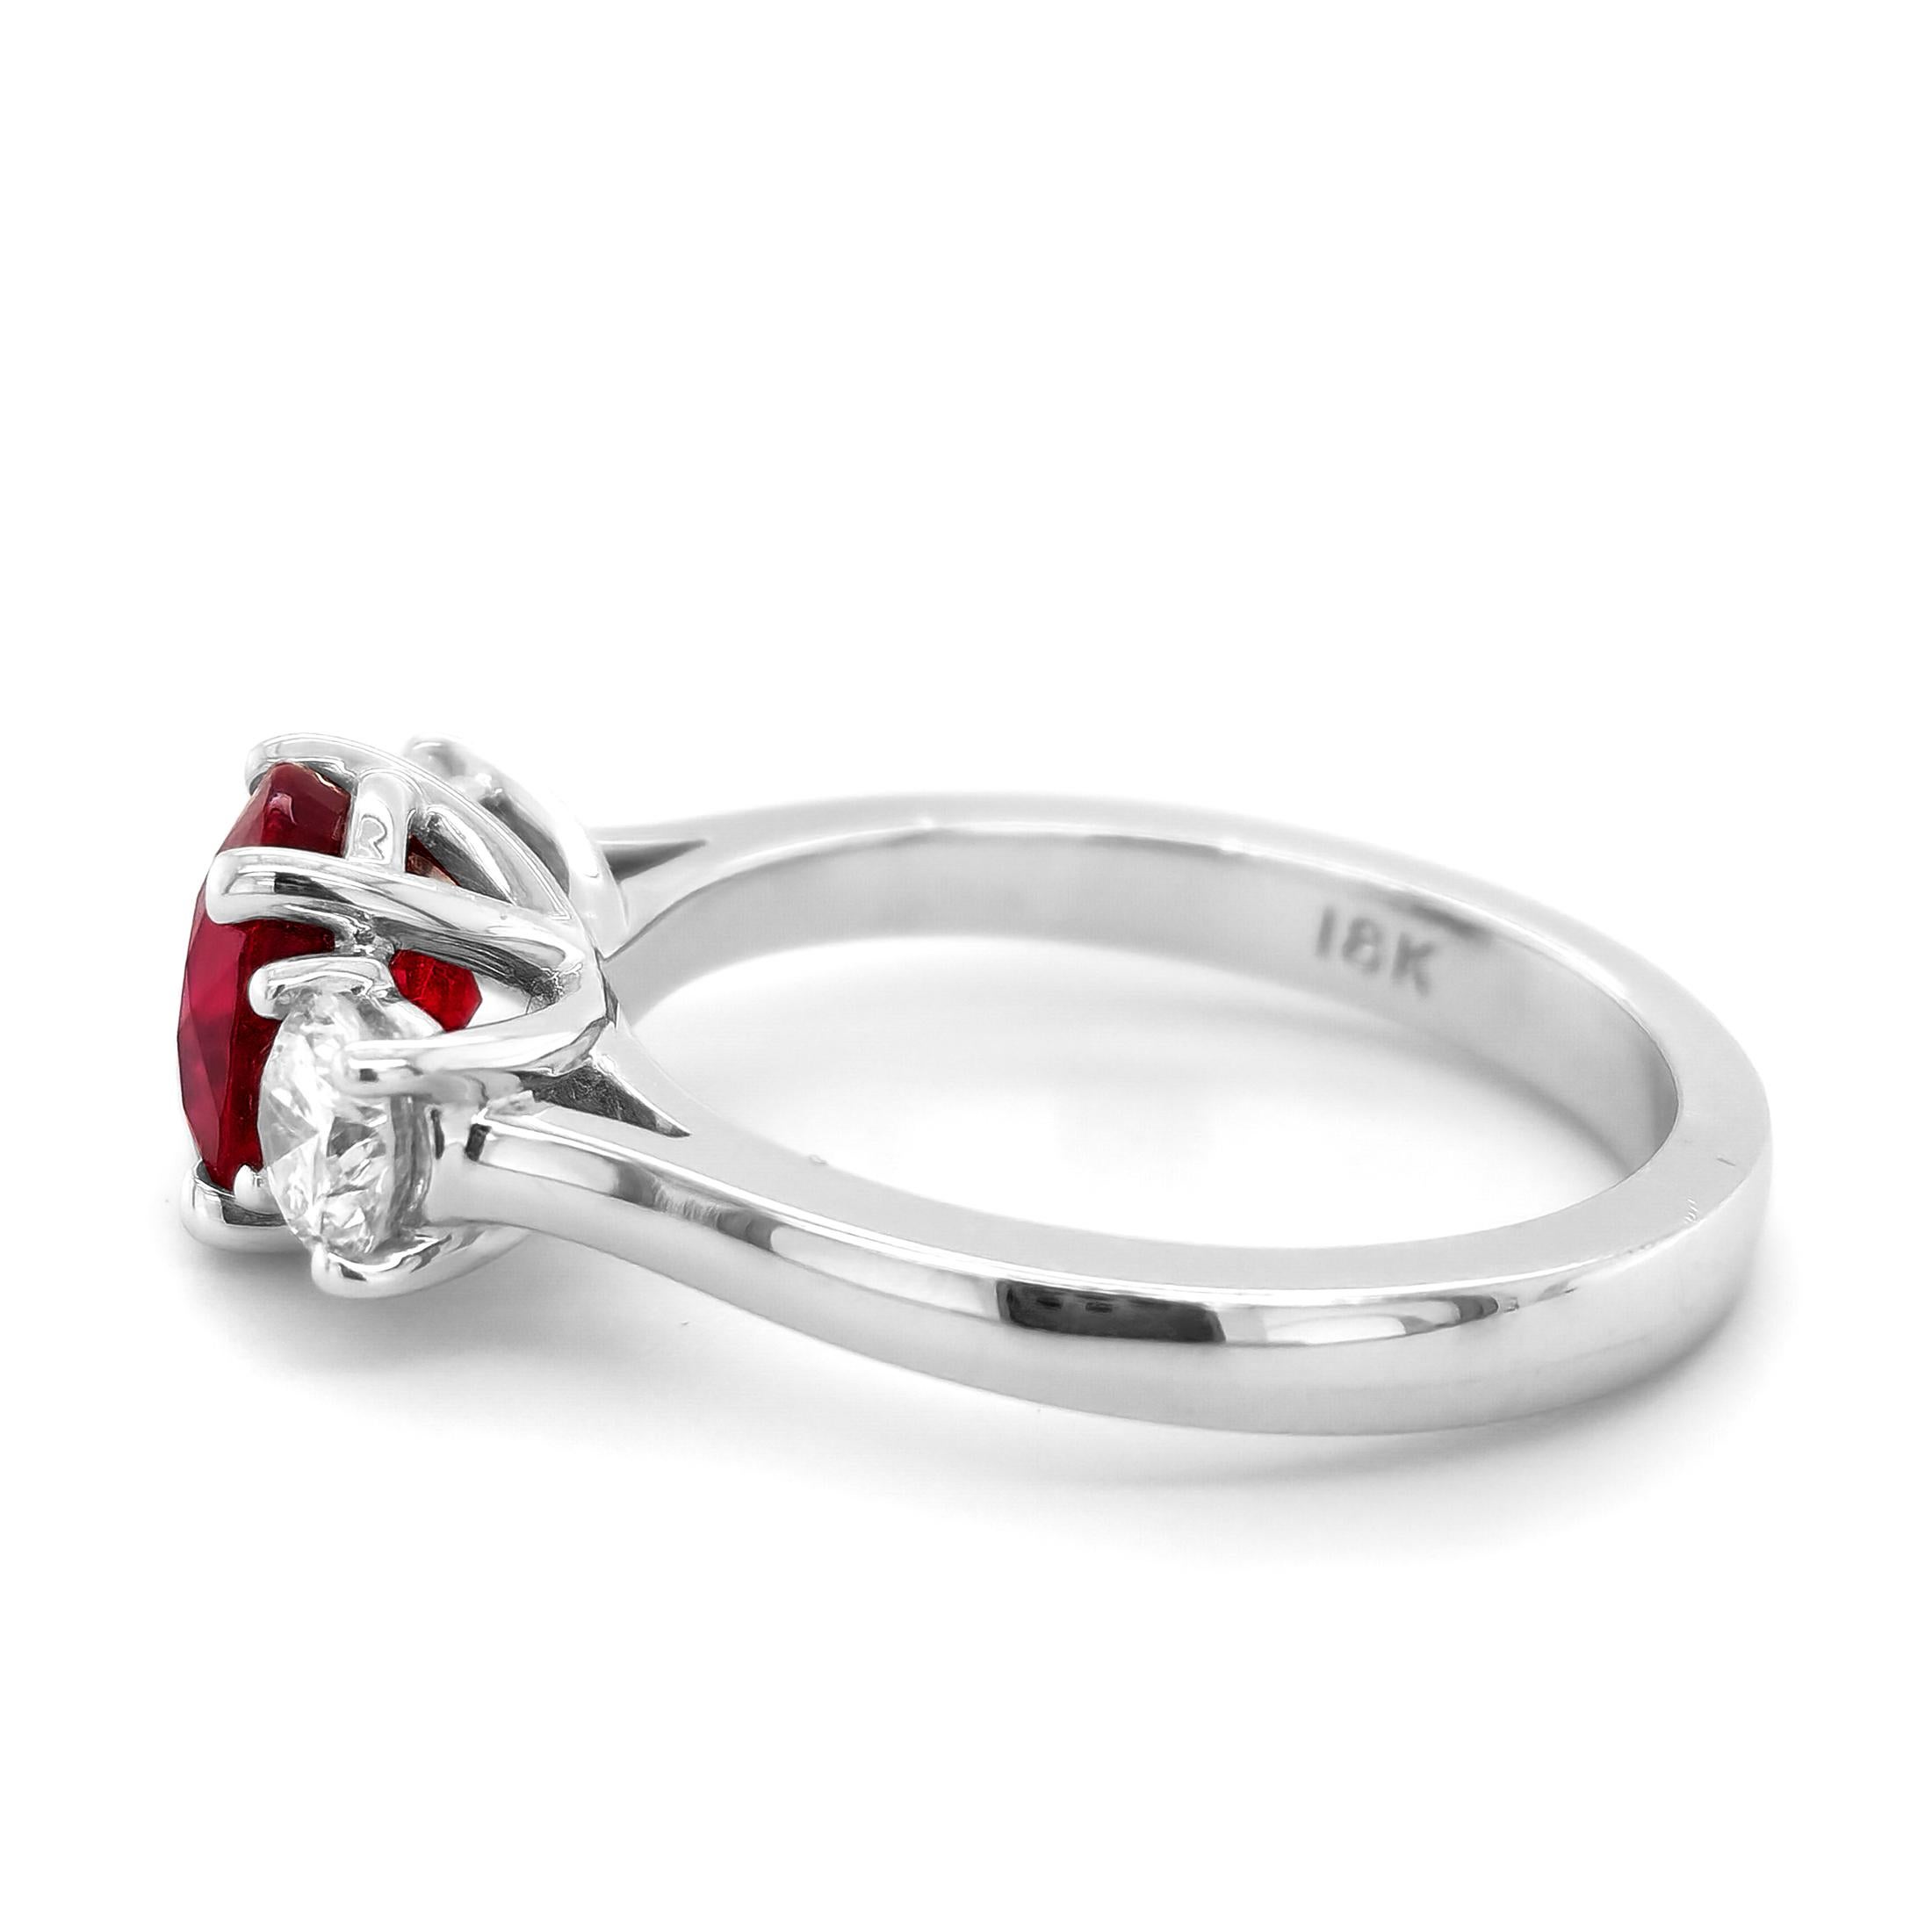 GIA Certified 1.81 Carats Burma Ruby Diamonds set in 18K White Gold Ring In New Condition For Sale In Los Angeles, CA